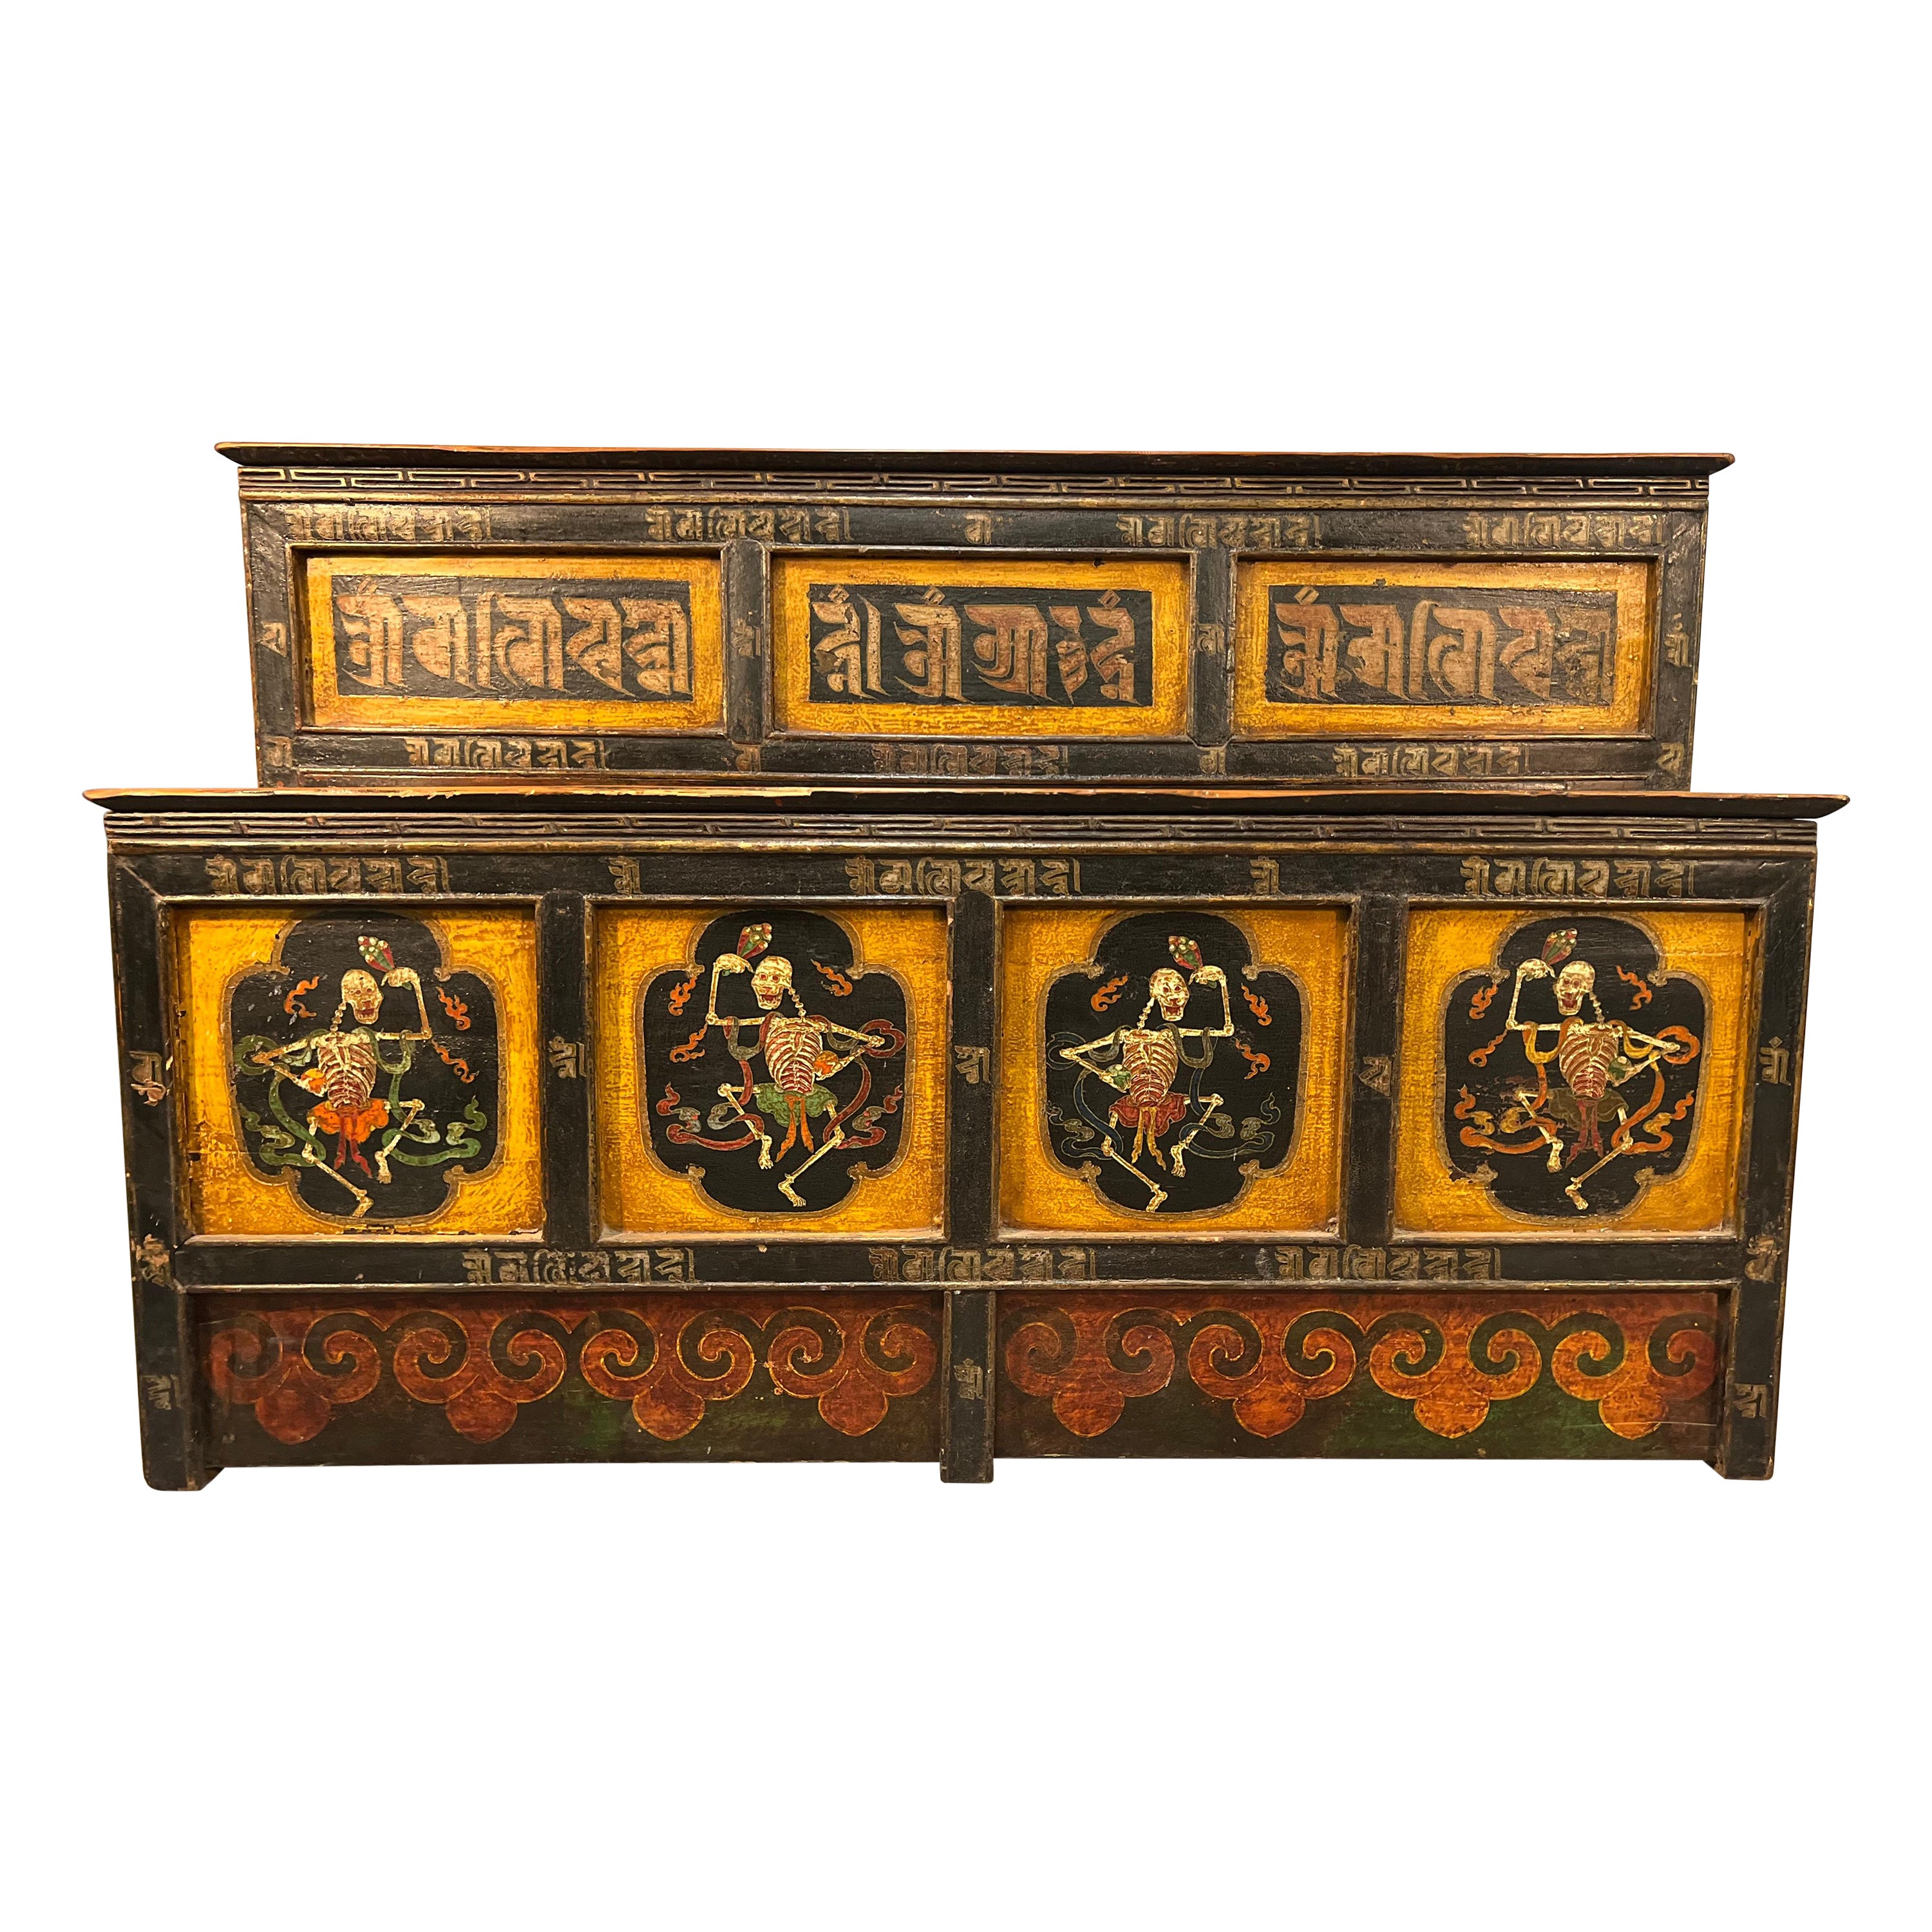 Tibetan Alter Table in a Yellow, Black and Red Painted Finish For Sale